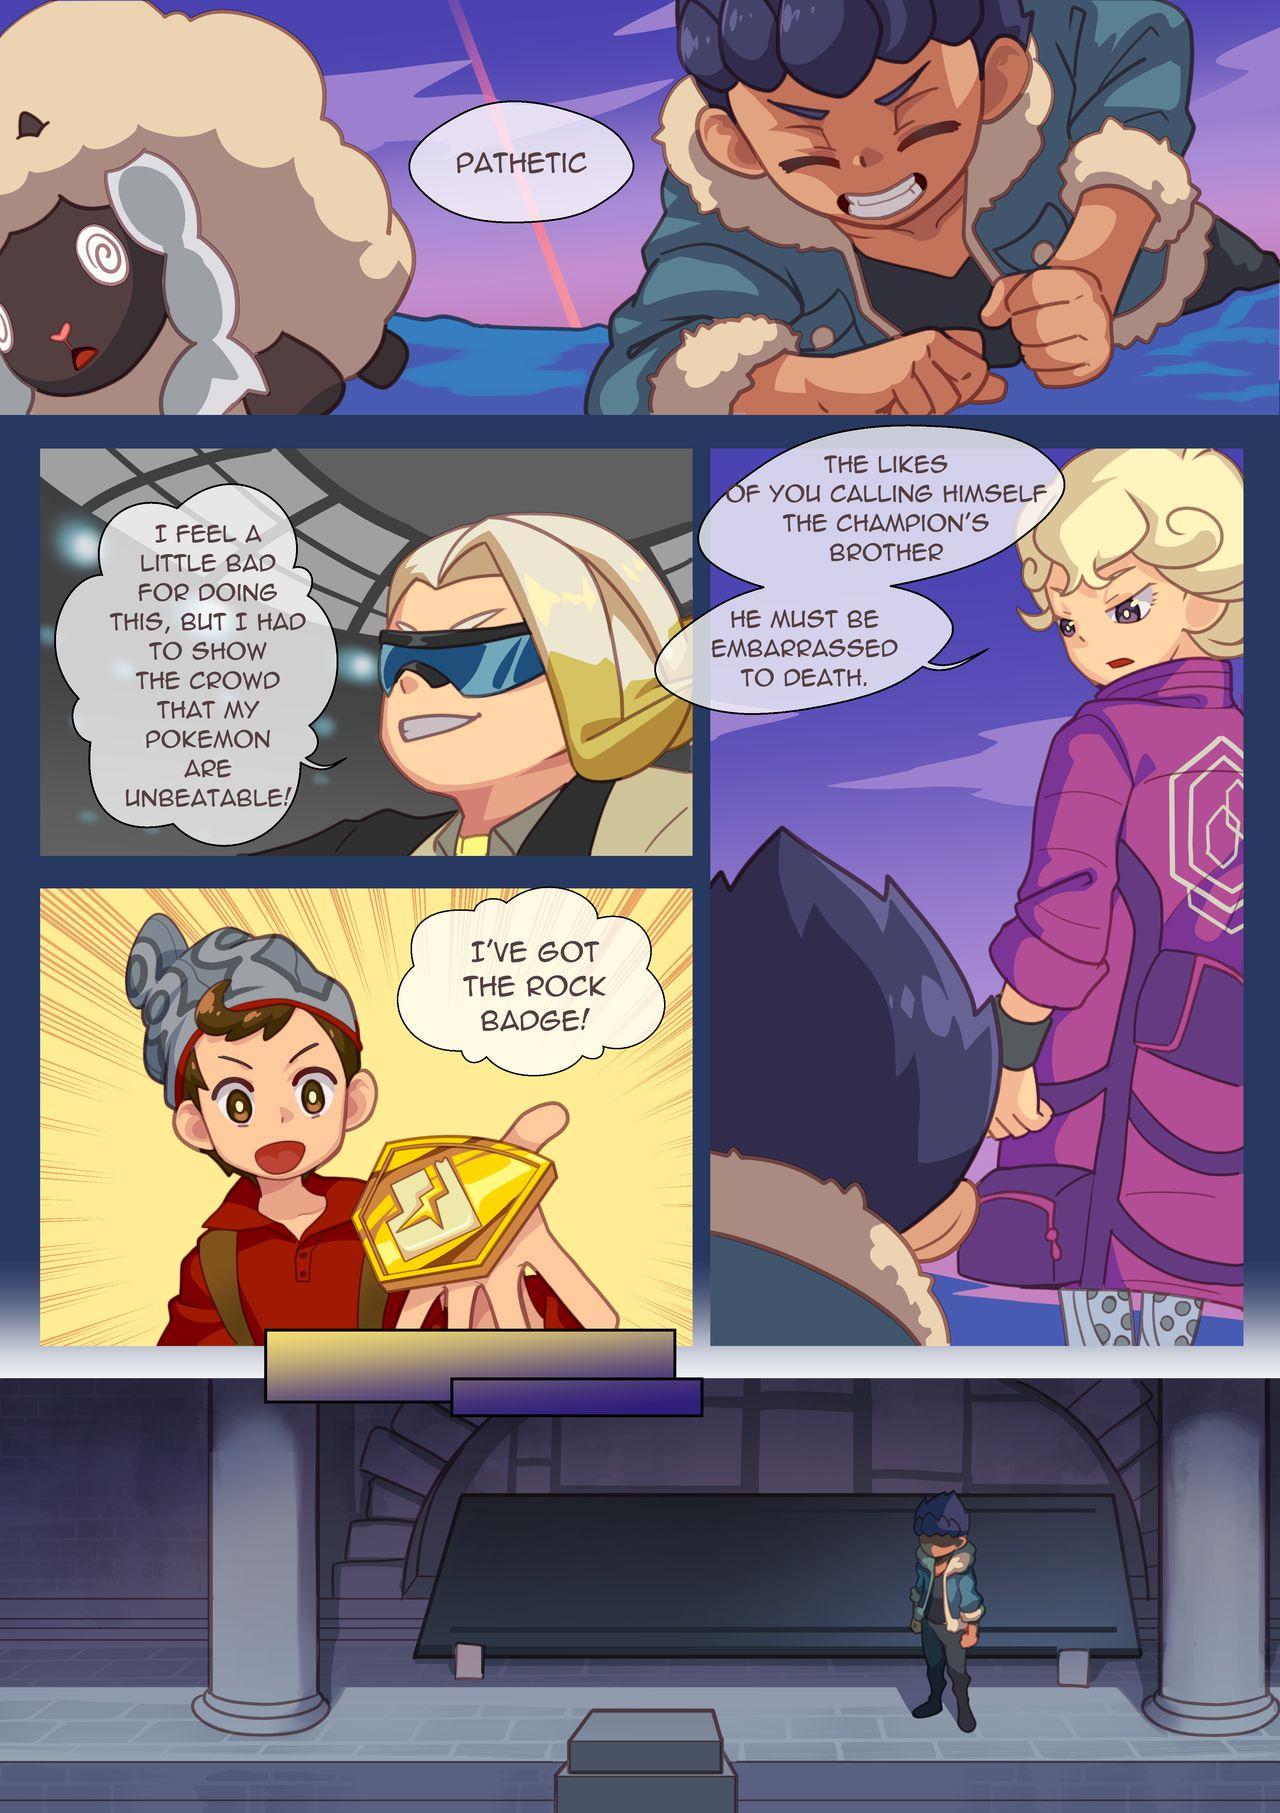 Car Trainer Trainer - Pokemon Tease - Page 6